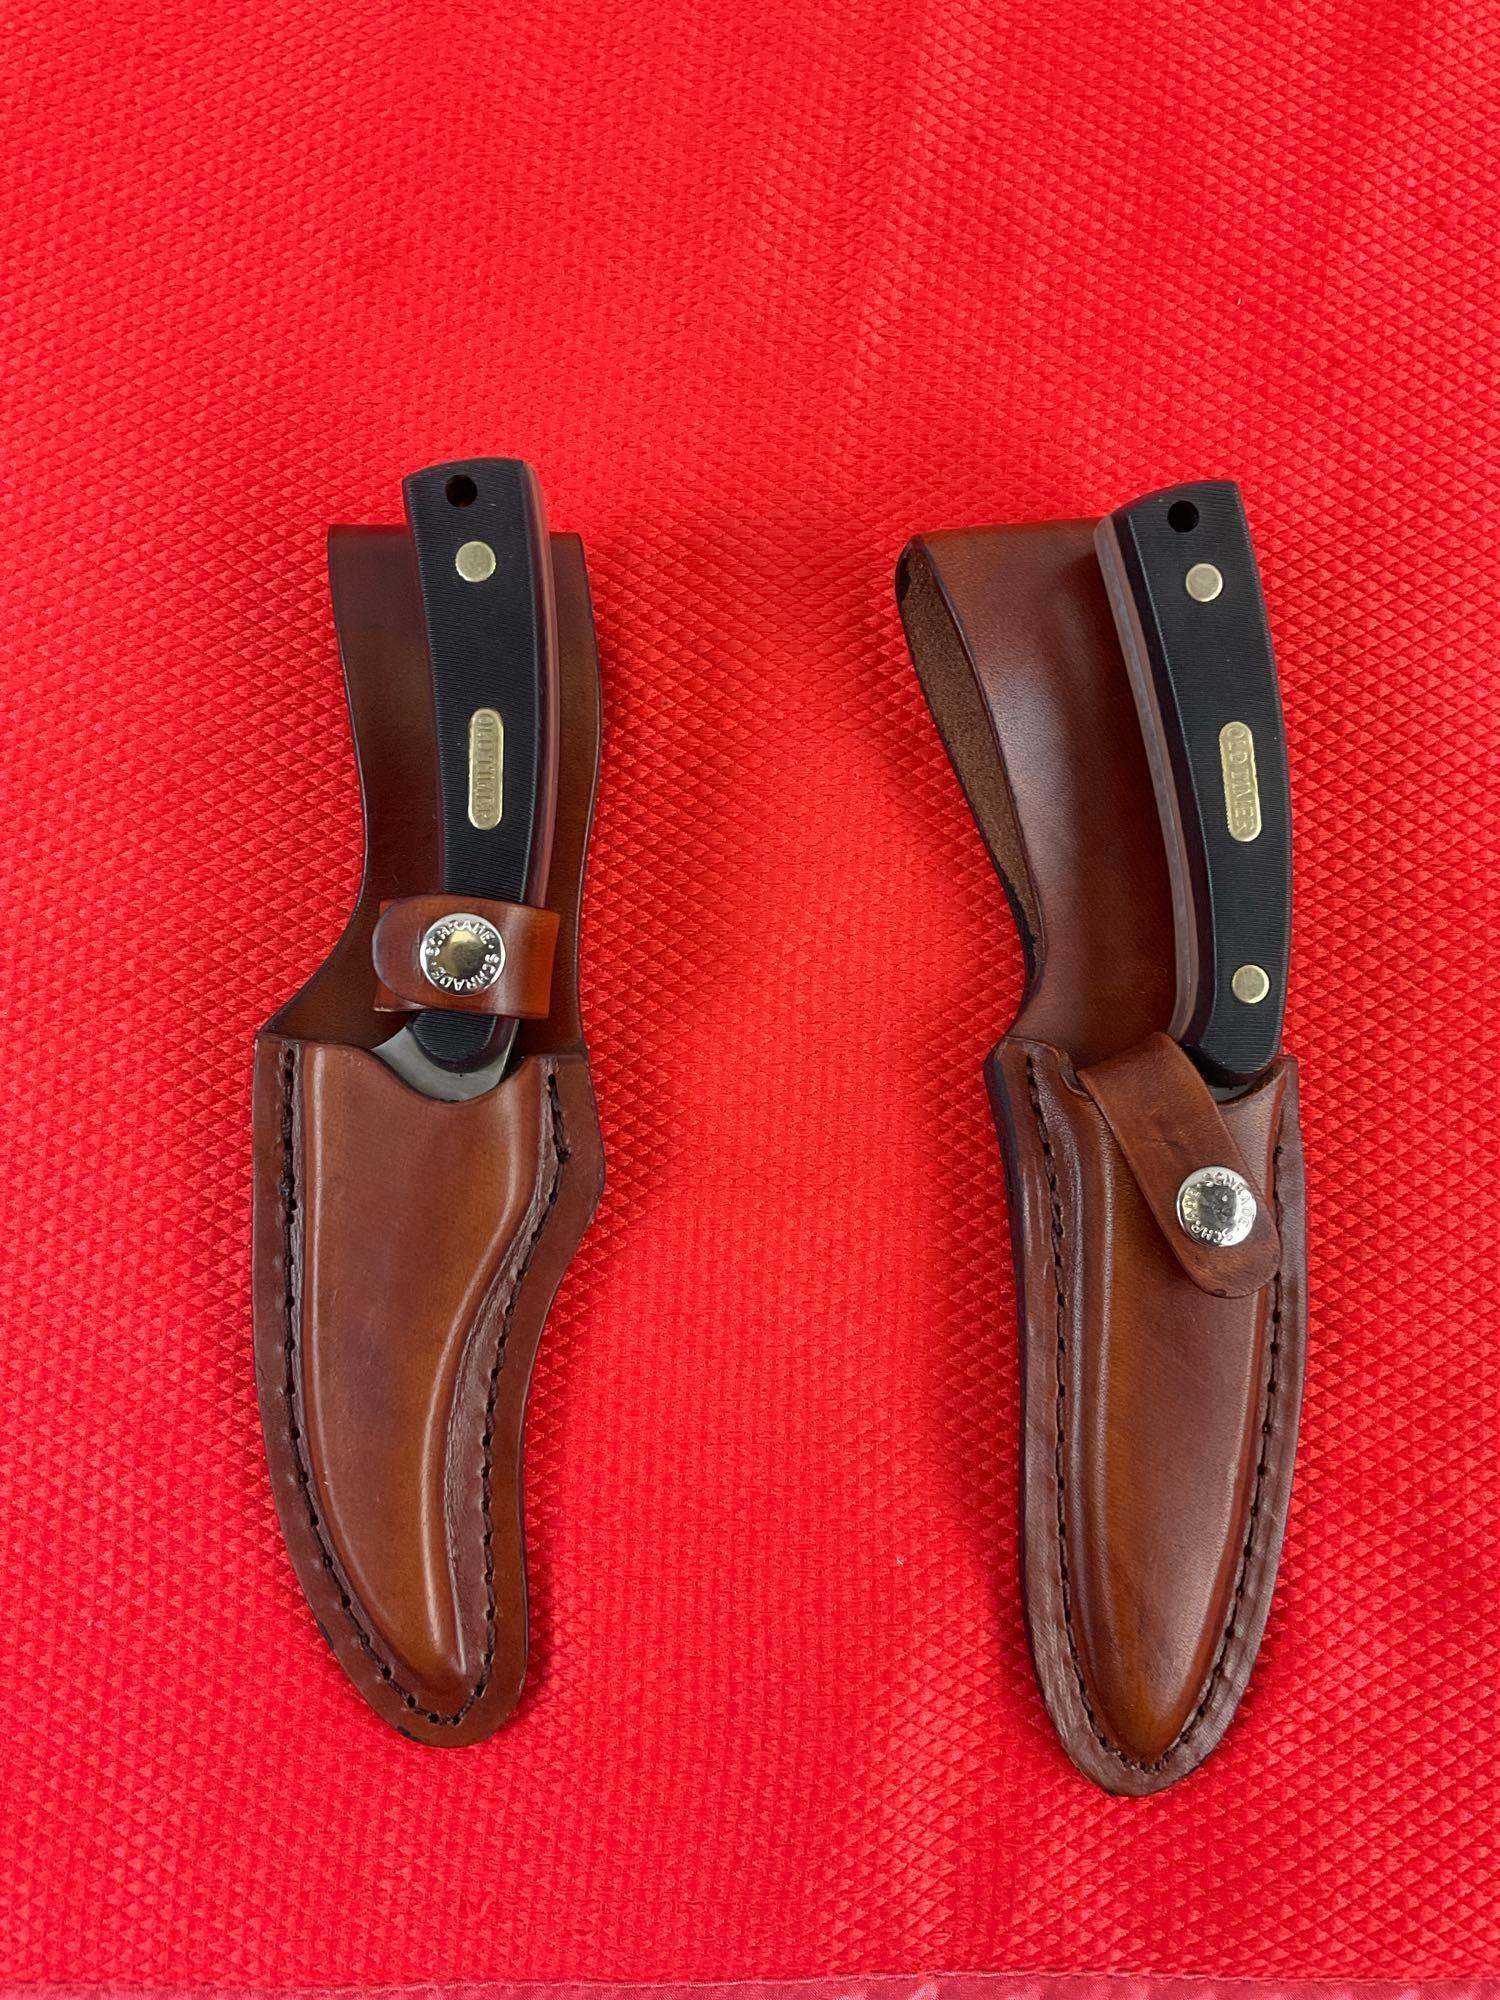 2 pcs Schrade Old Timer Stainless Steel Knives w/ Leather Sheaths. Models 1520T & 1580T. NIB. See